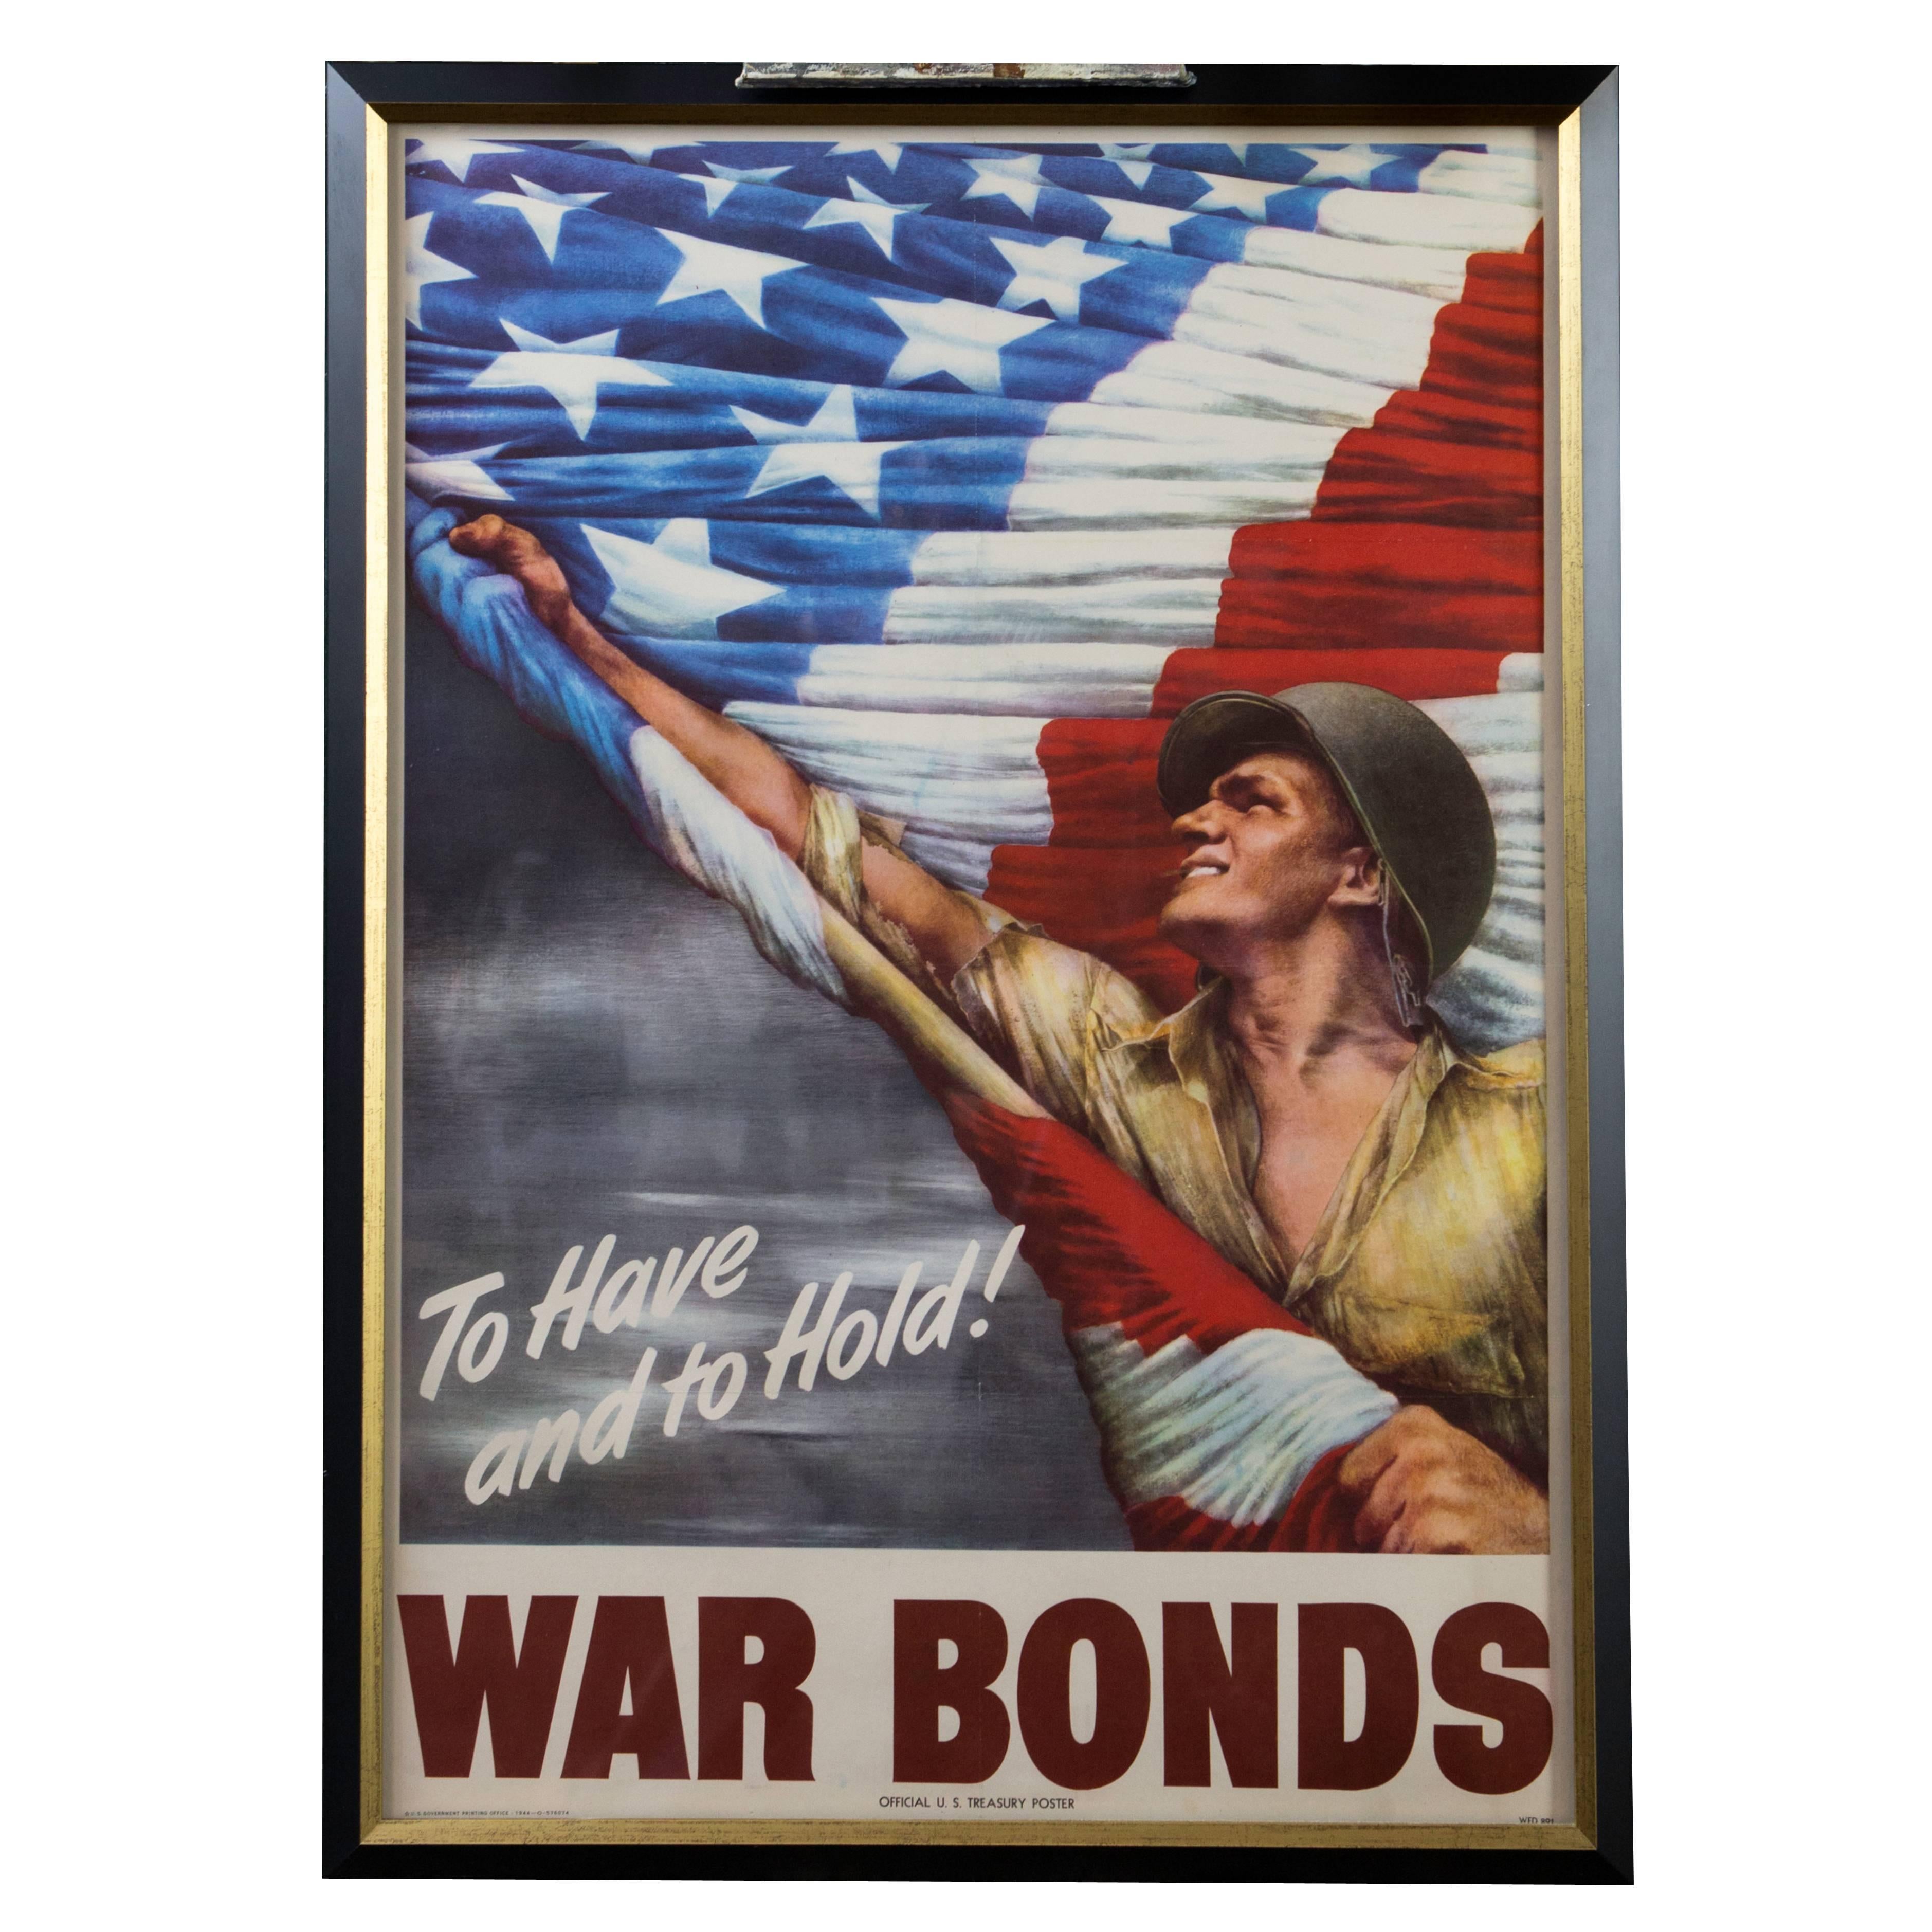 WW II Patriotic "To Have and to Hold!" War Bonds Poster, Circa 1942